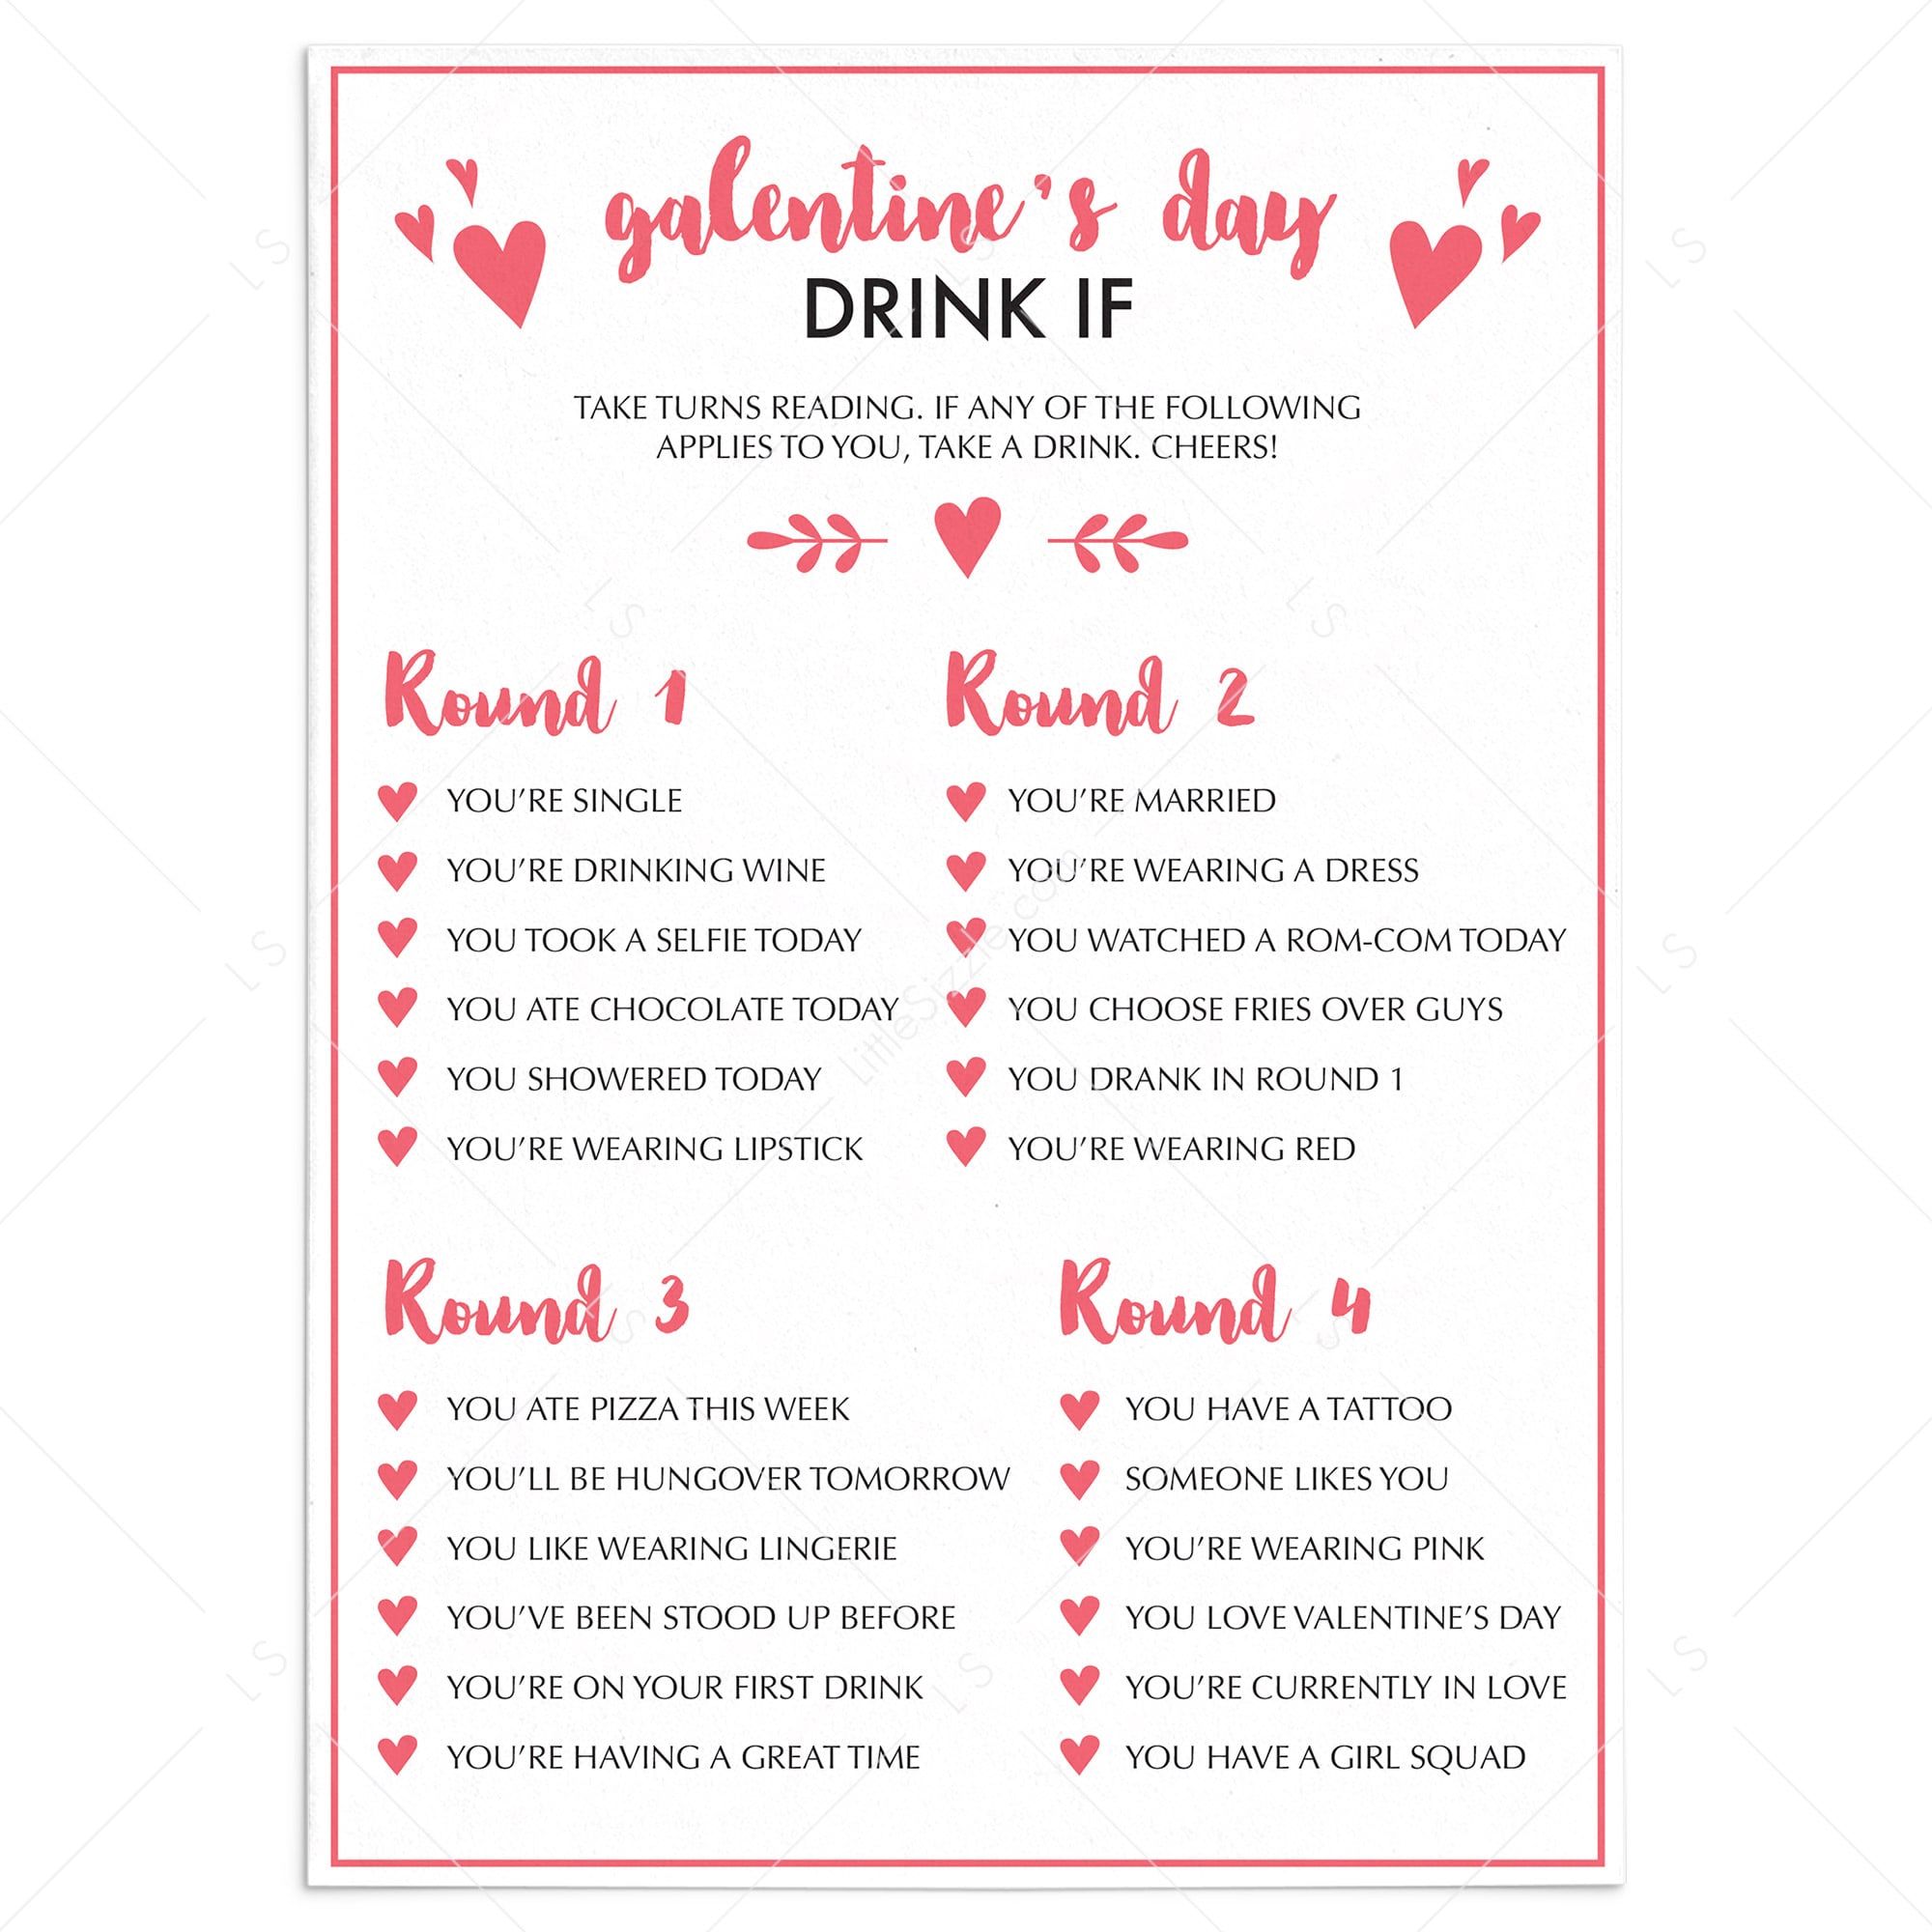 Printable Galentines Day Card Pack, Digital Download Galentines Day Gifts,  Last Minute Galentines Card DIY for Best Friends and Girlfriends 